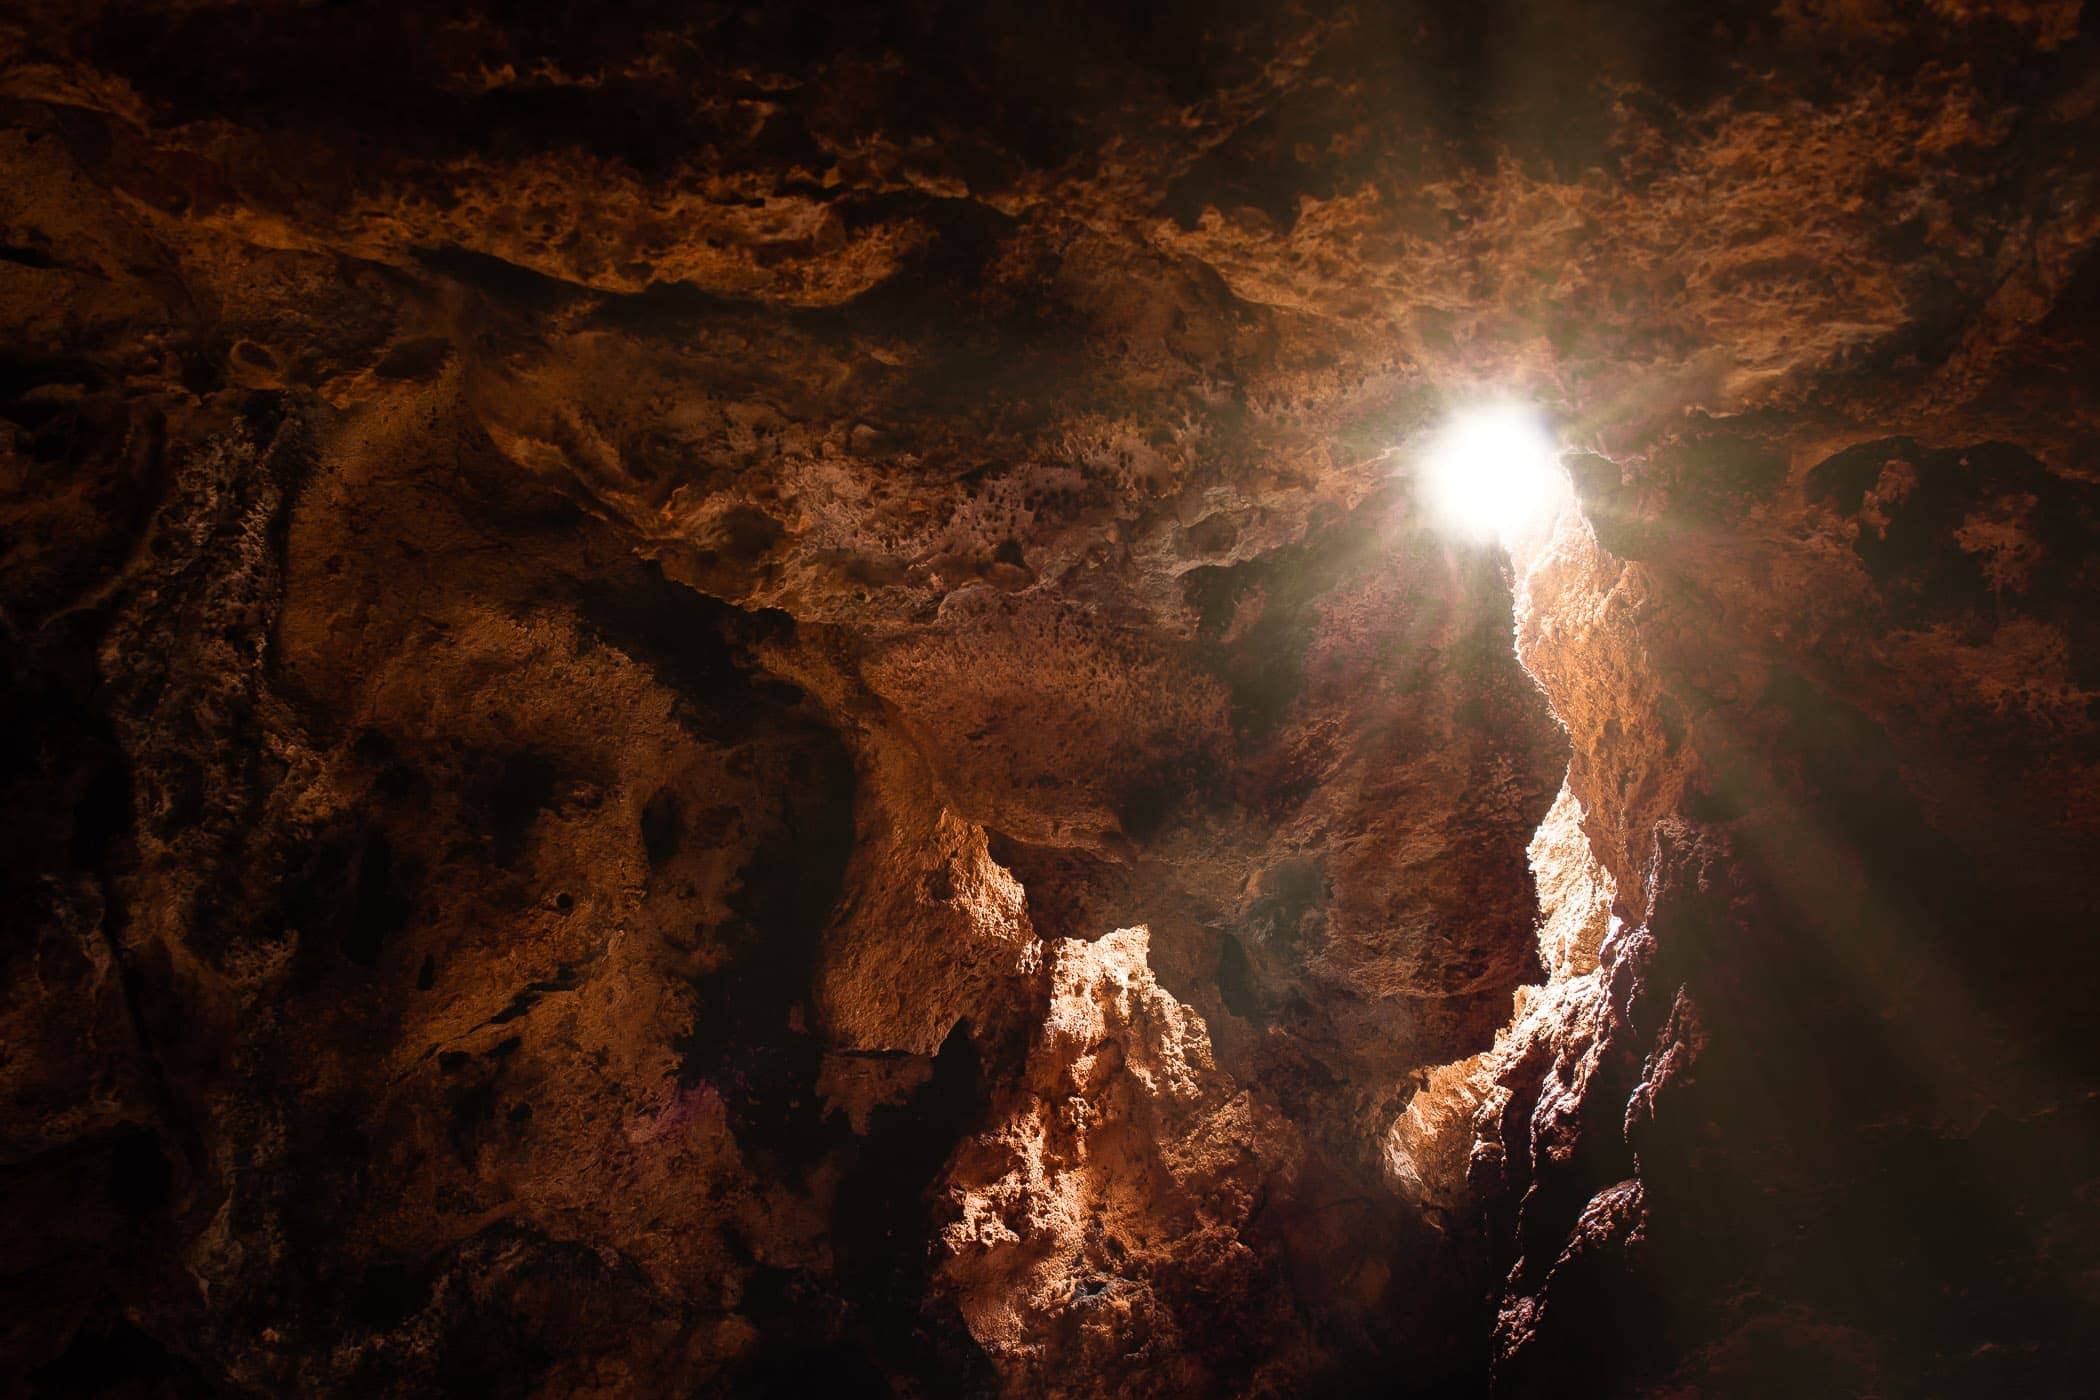 Sunlight streams through a small opening in the roof of a cave at Oklahoma's Turner Falls Park.